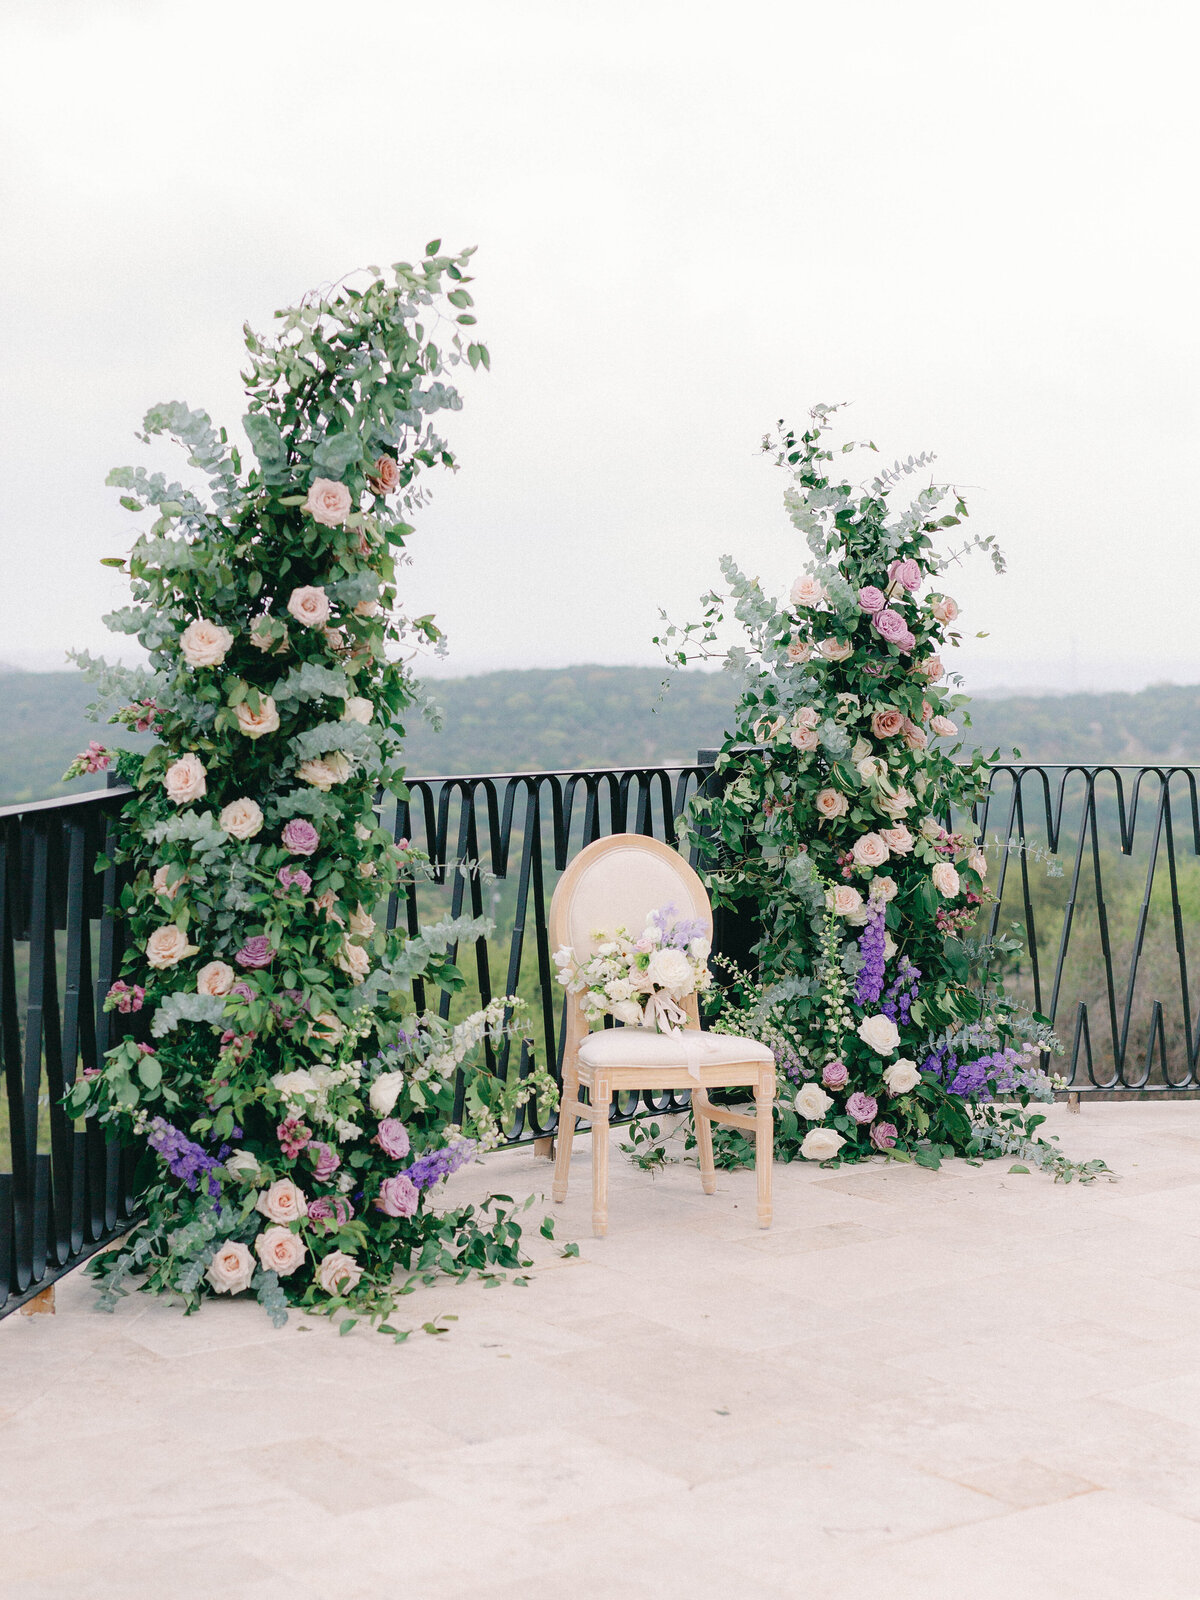 Shelby Day Photography is a light & airy wedding film photographer based in Houston and Austin, Texas.